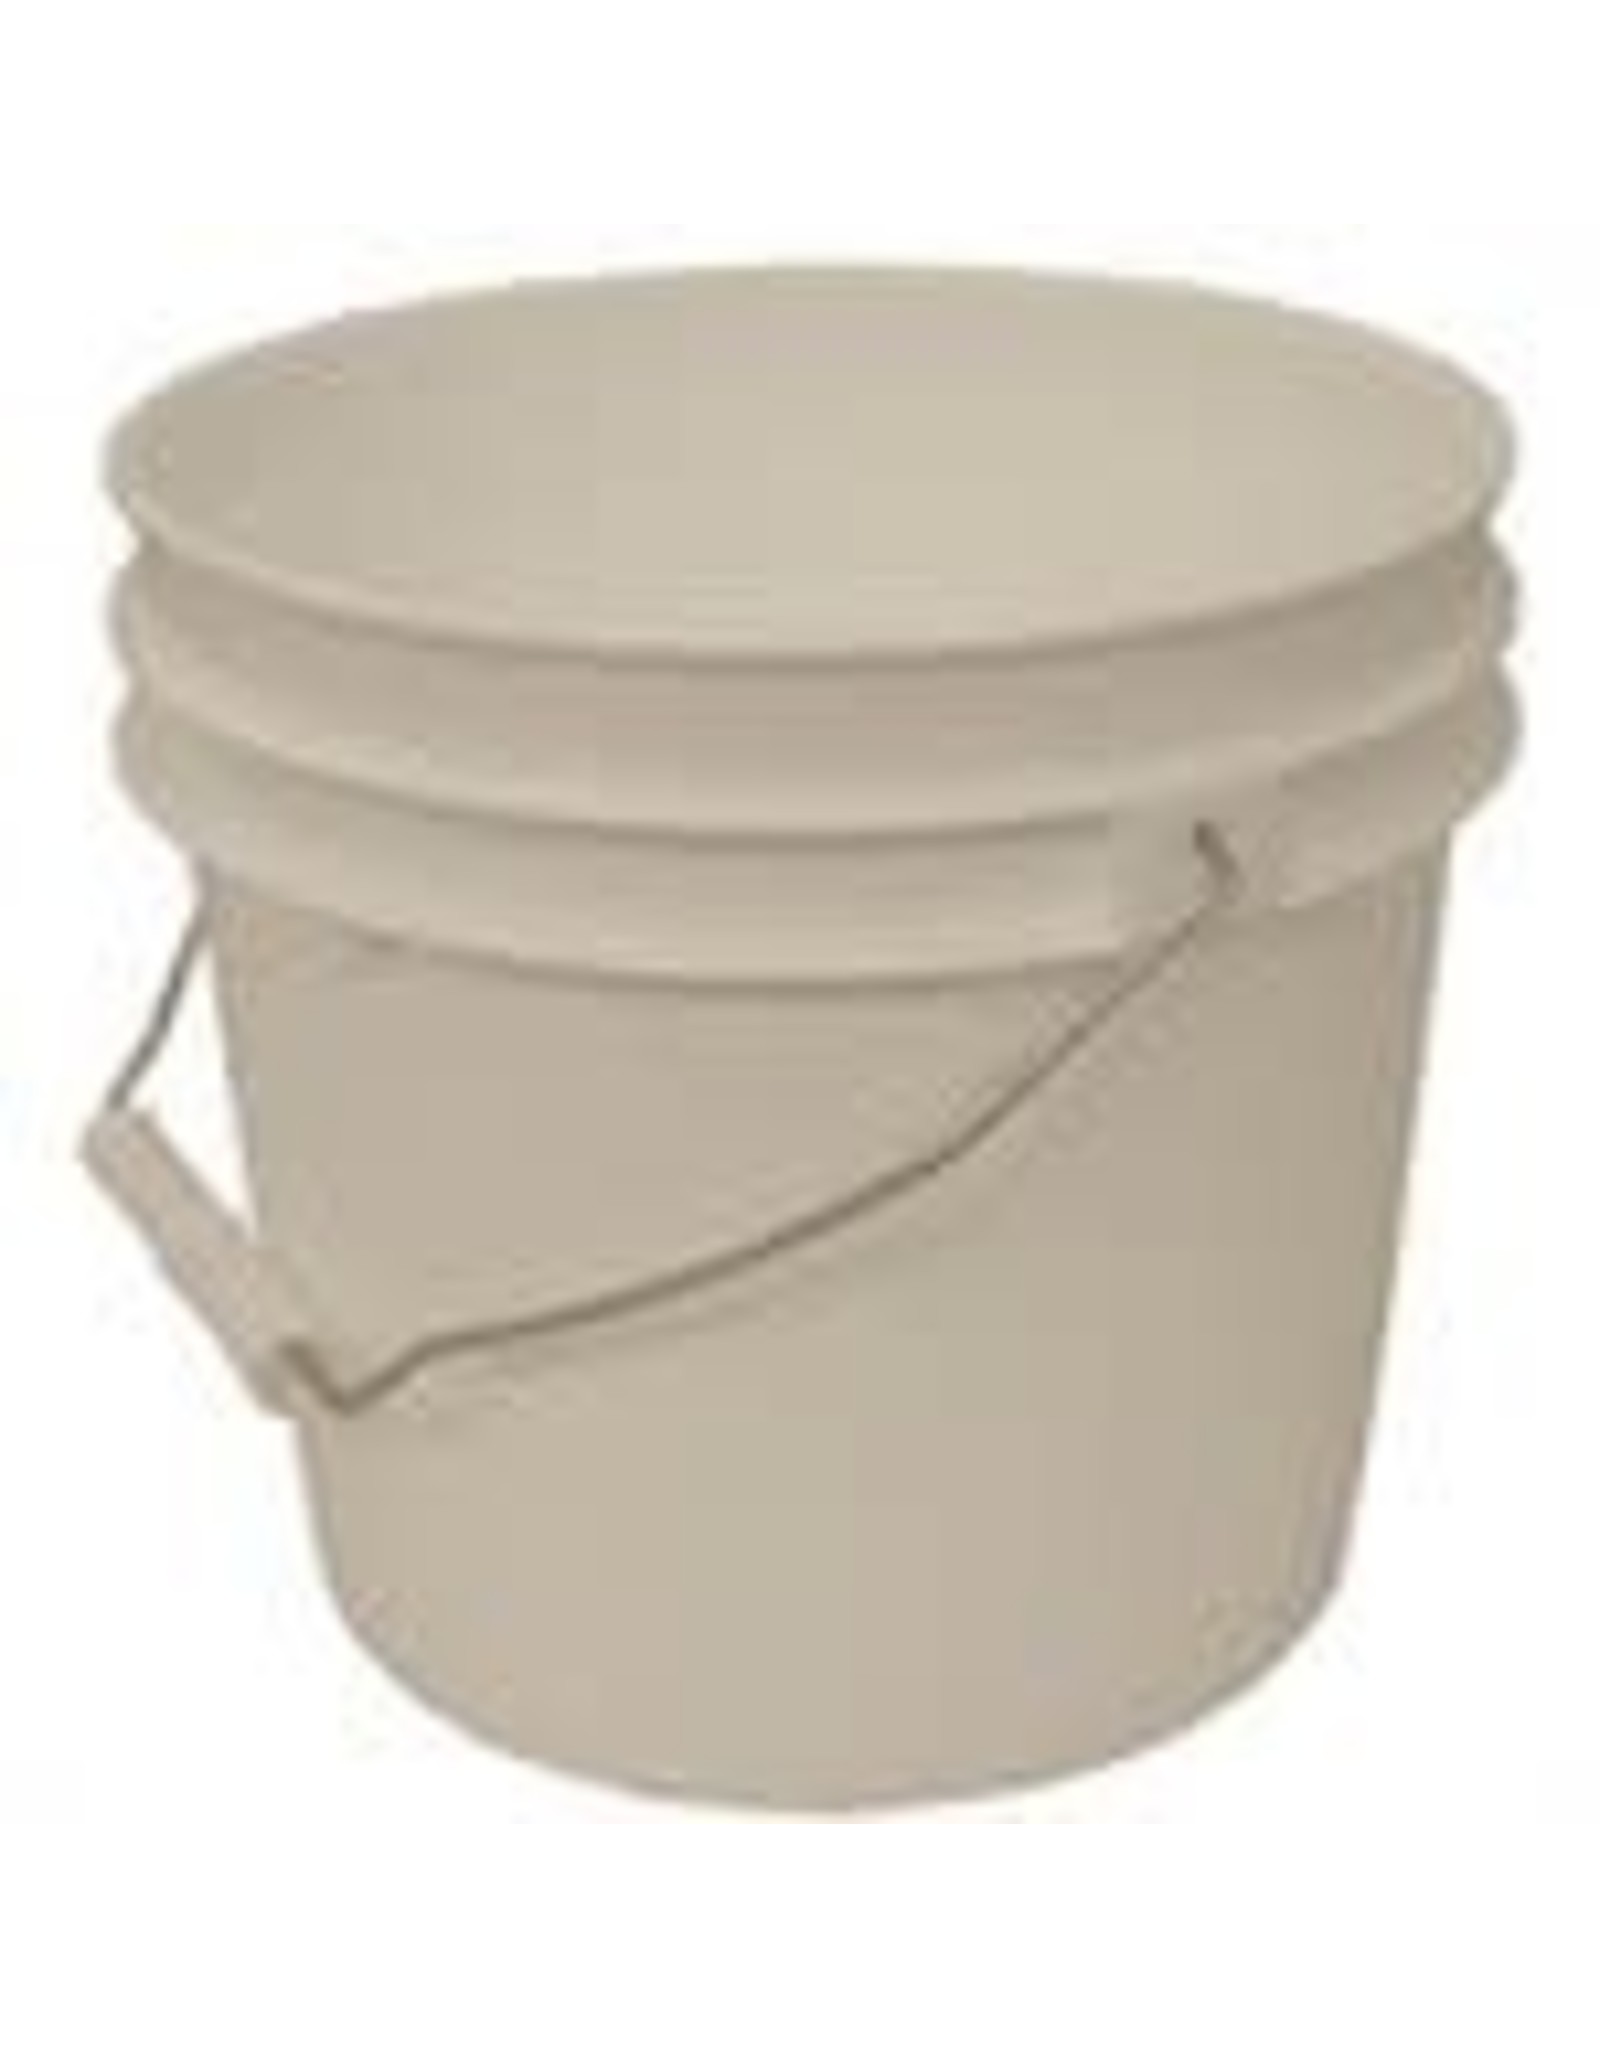 1 GALLON PLASTIC PAIL WITH LID